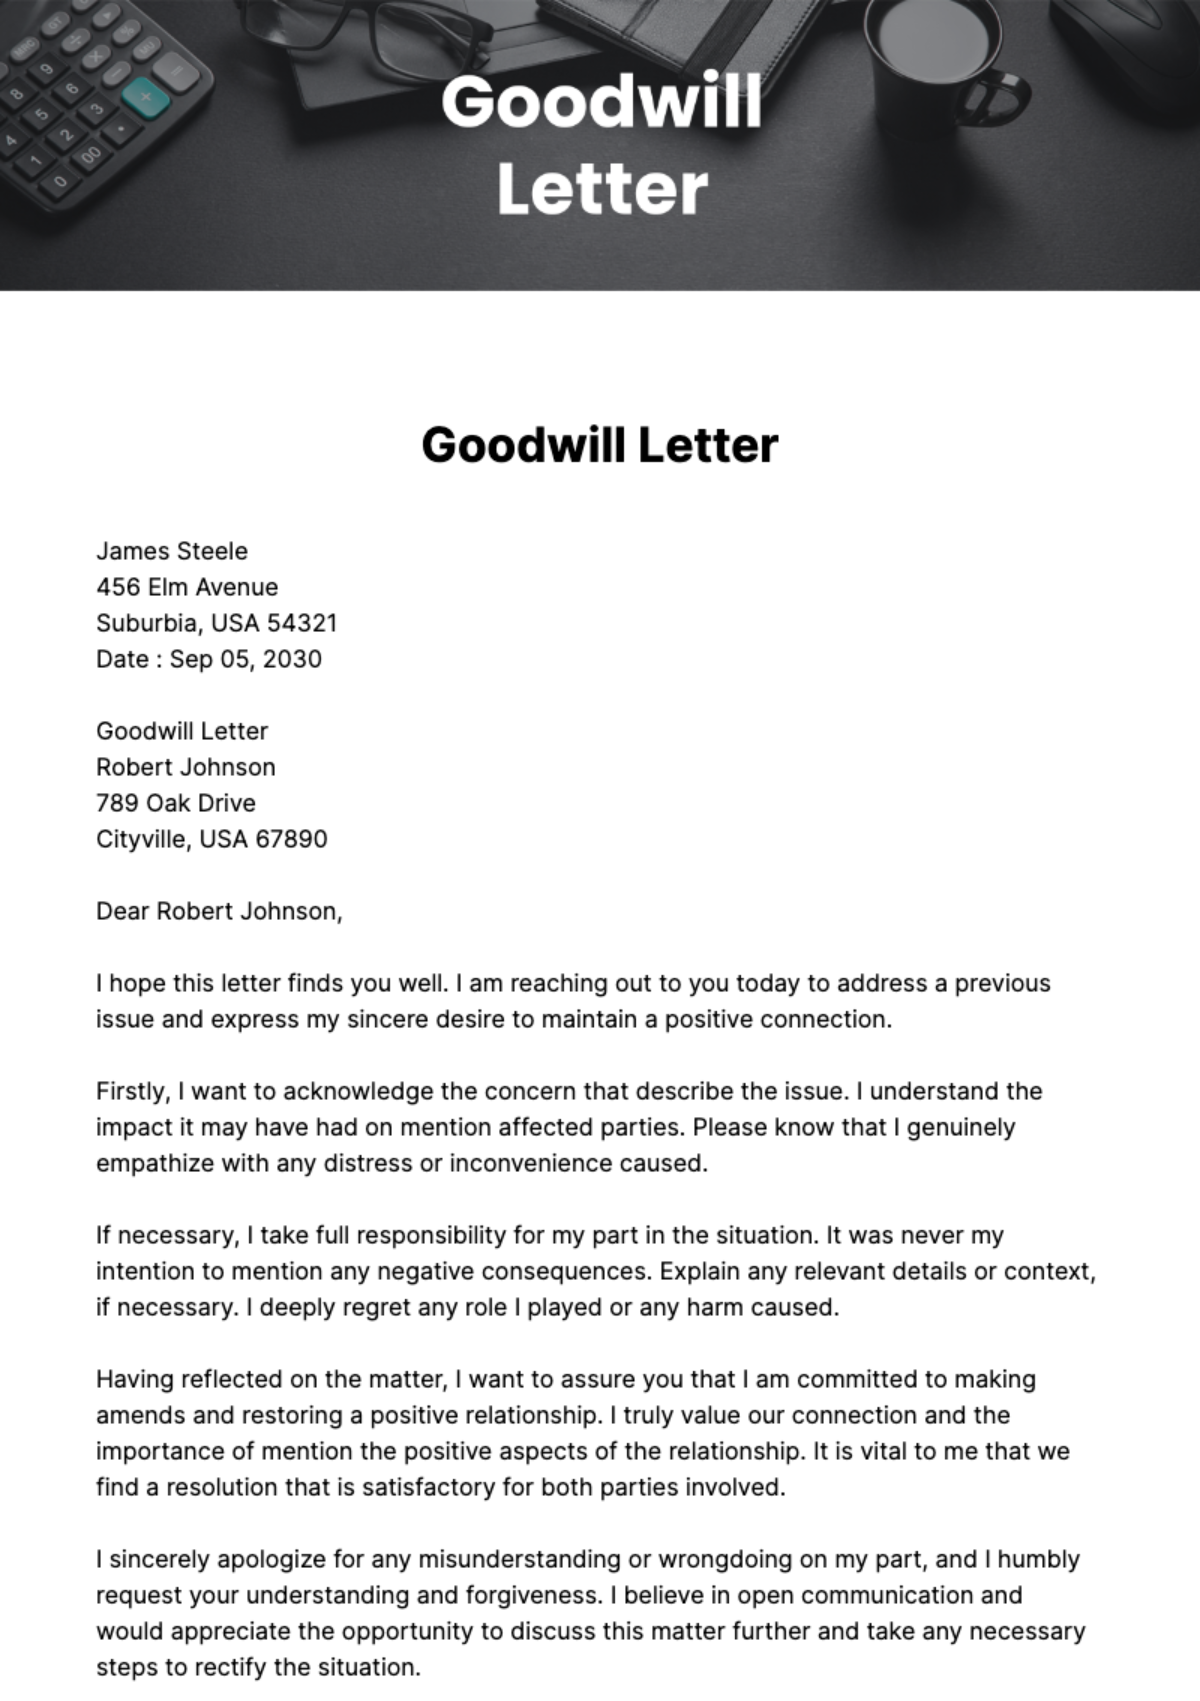 Free Goodwill Letter Template